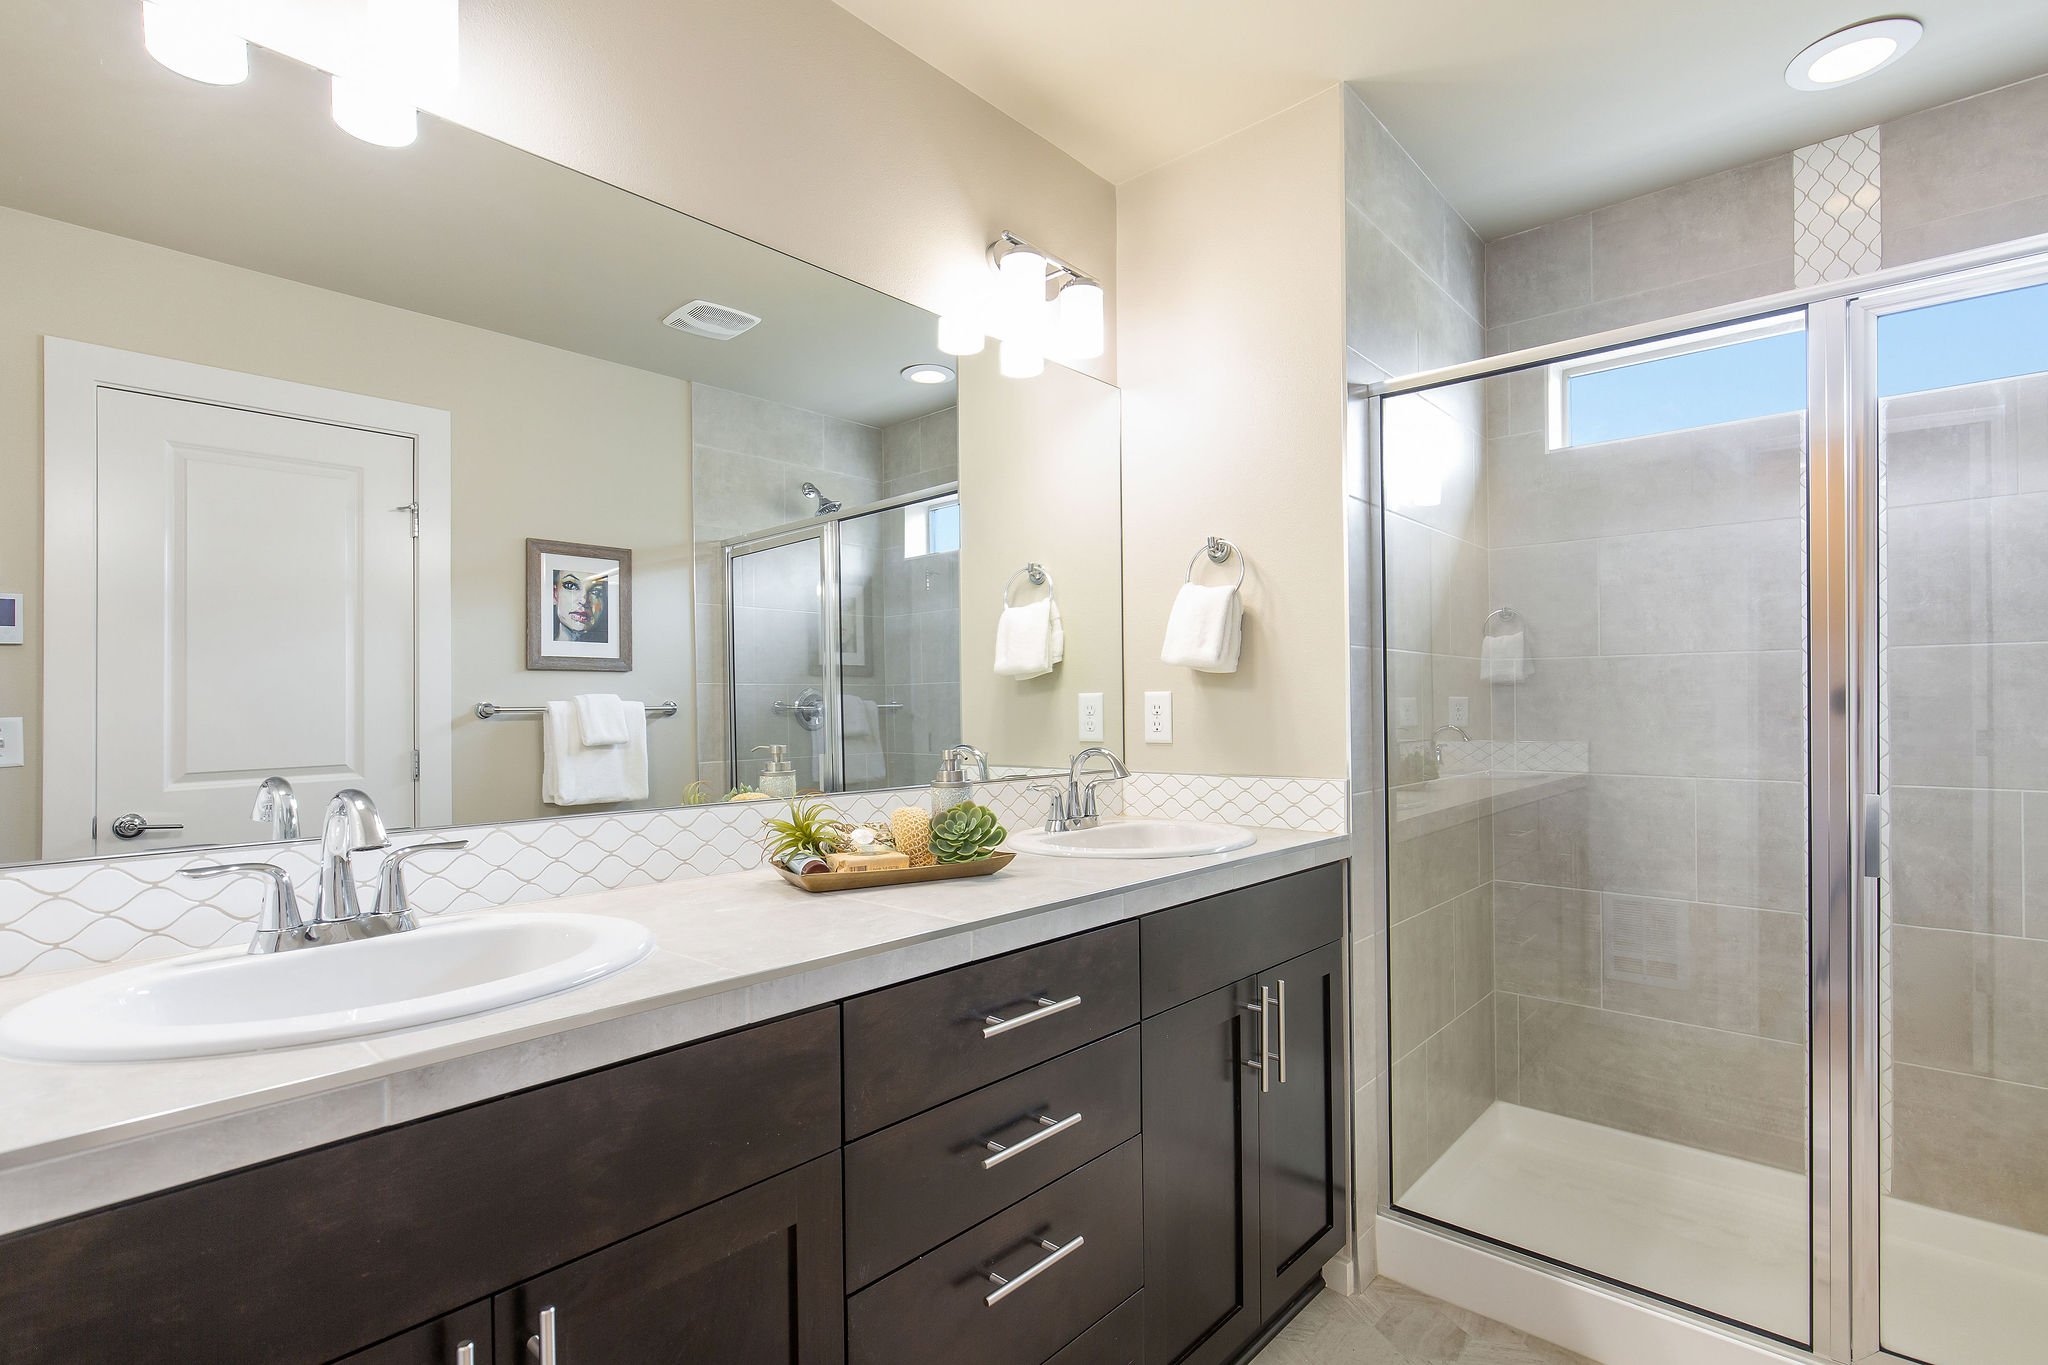  image description: interior of master bathroom with 2 sinks and large walk in shower 